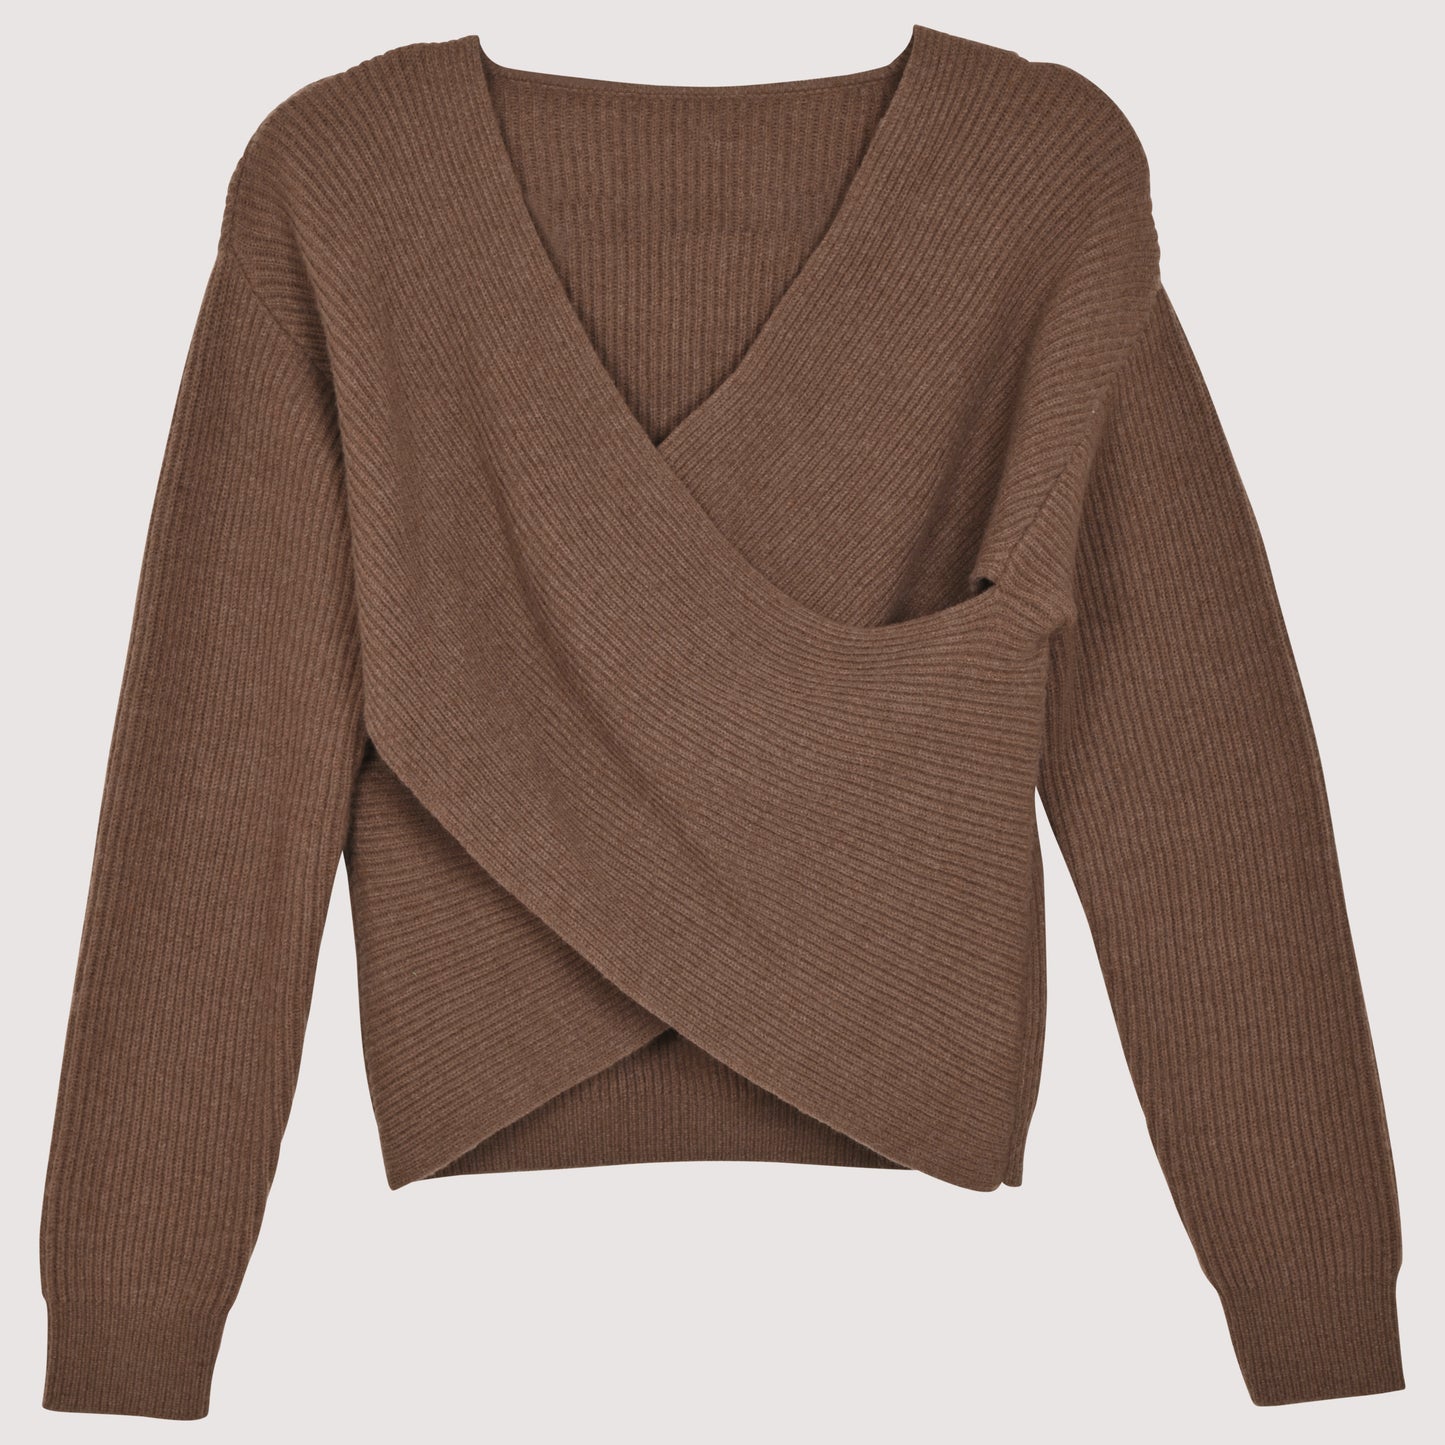 STORY CROSS FRONT KNIT SWEATER